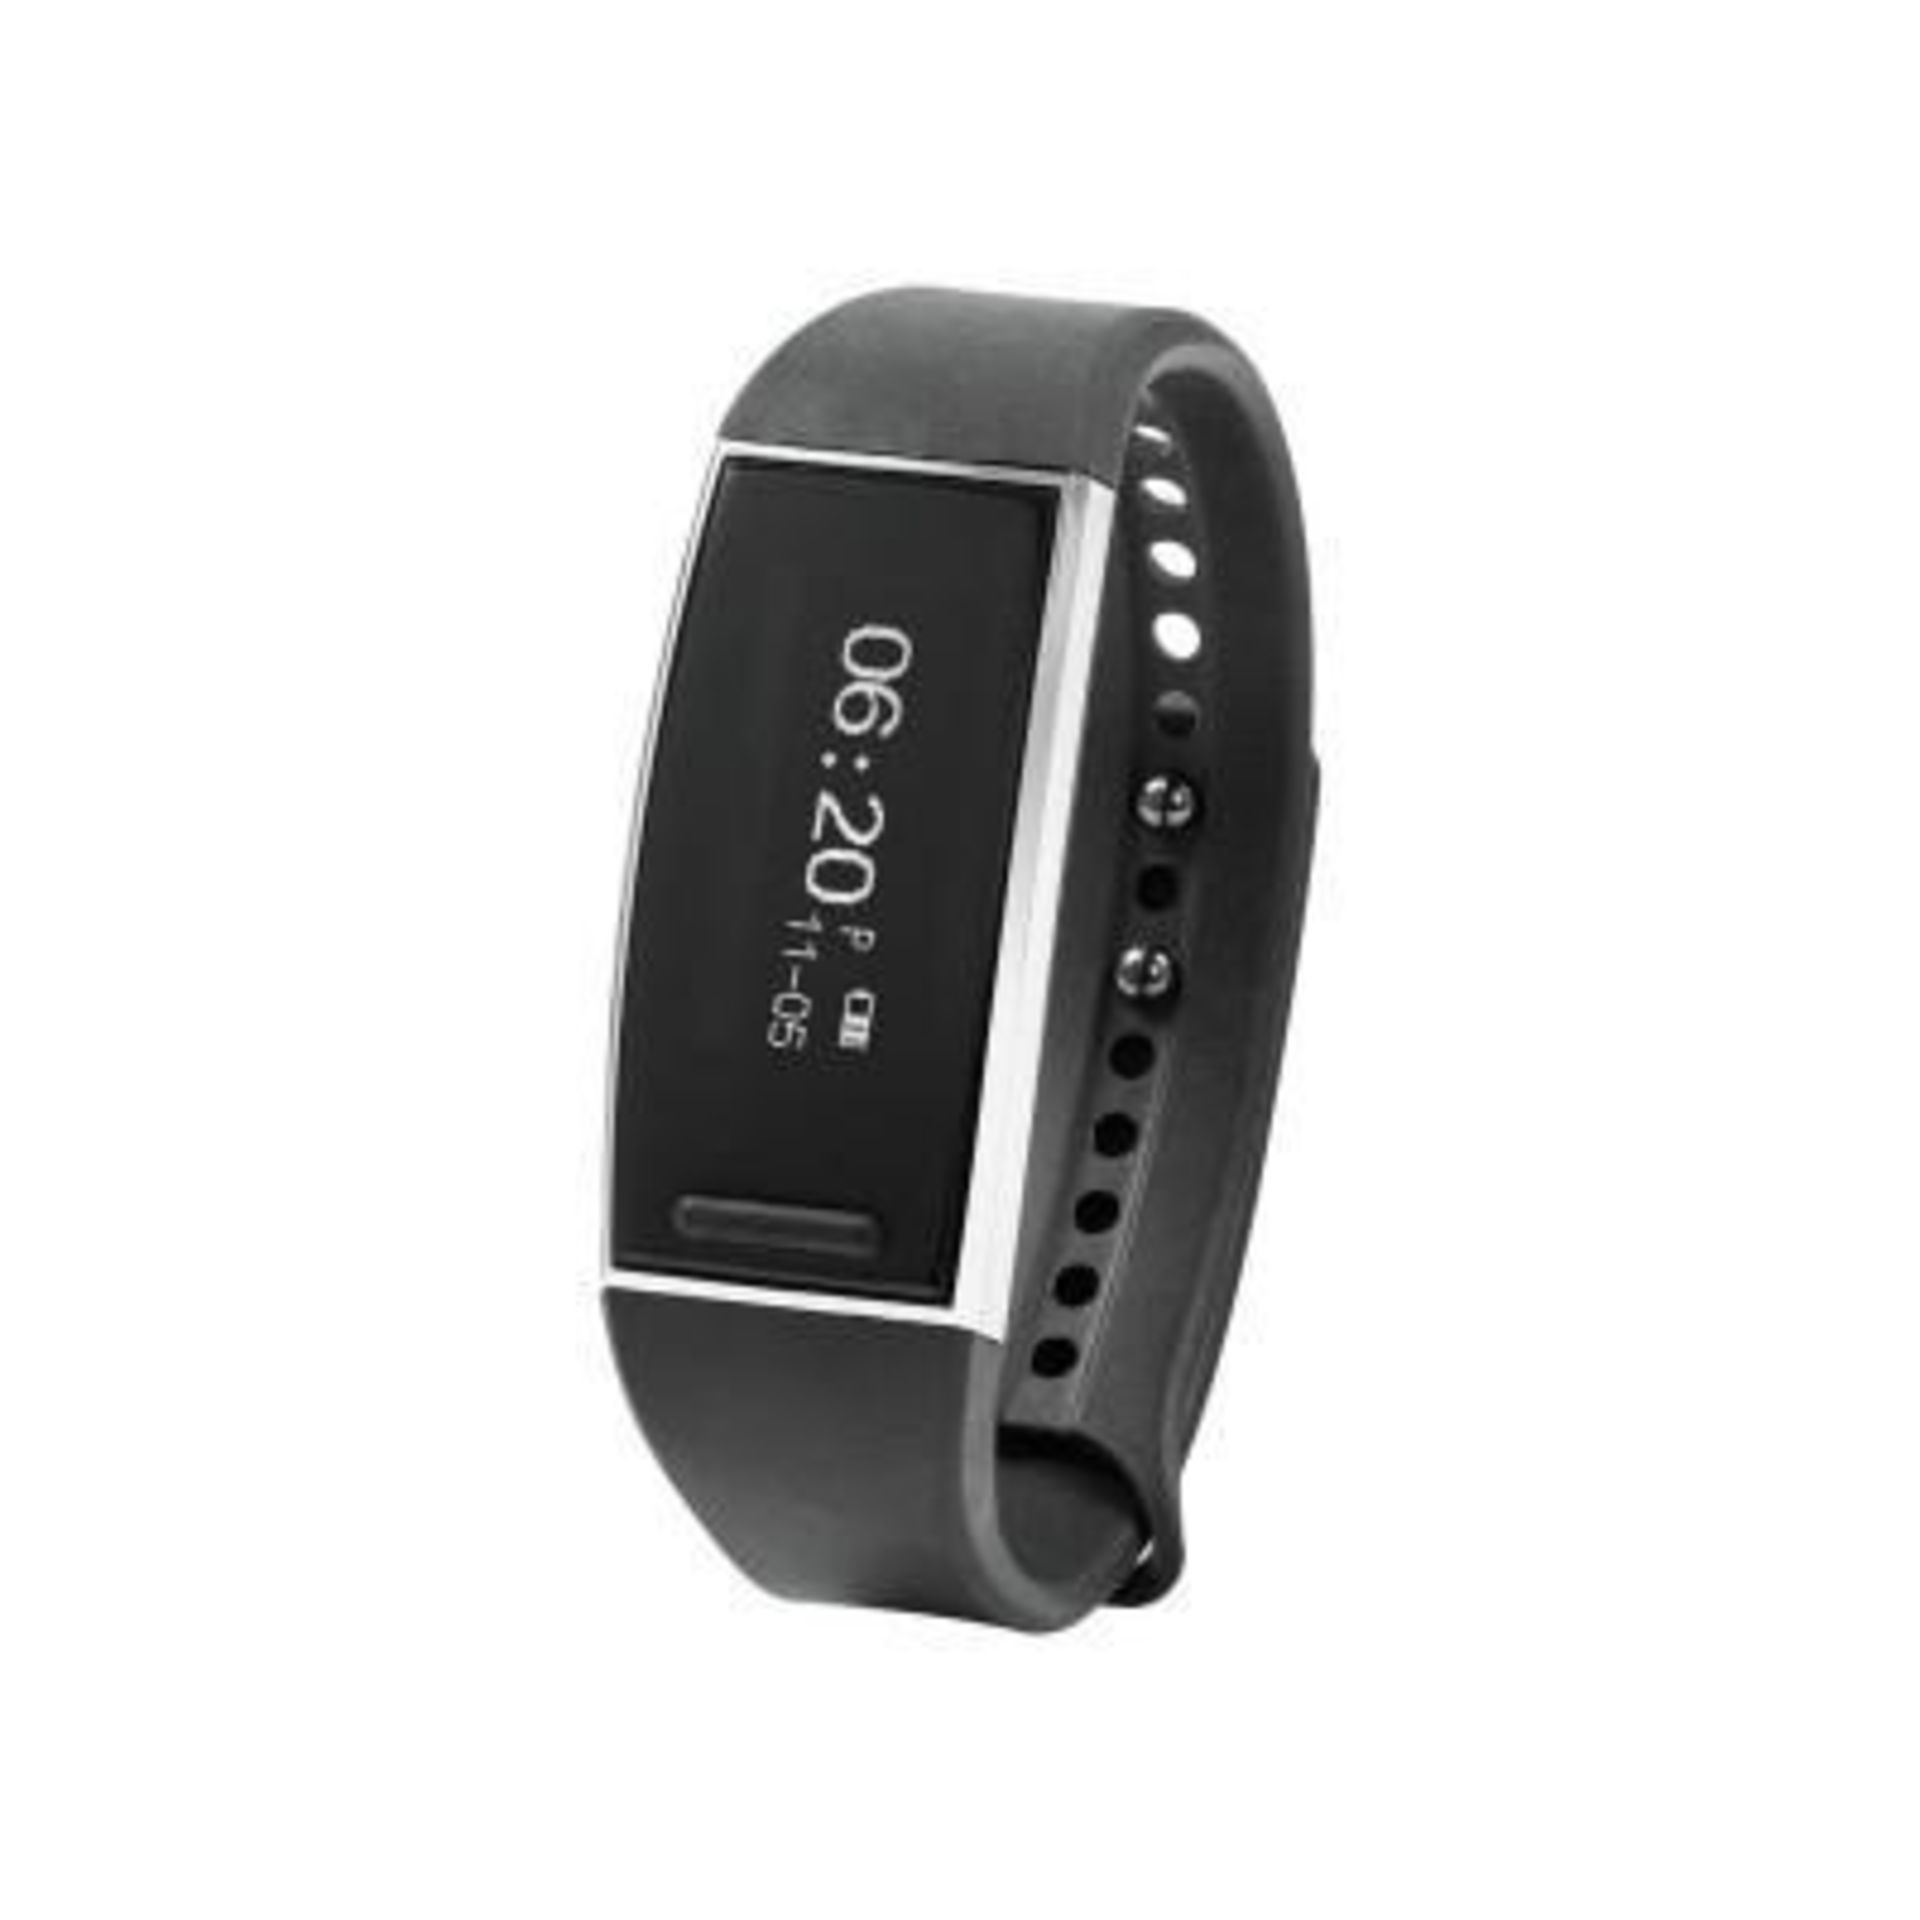 NUBAND FLASH AND HR TRACKER - £29.99 RRP